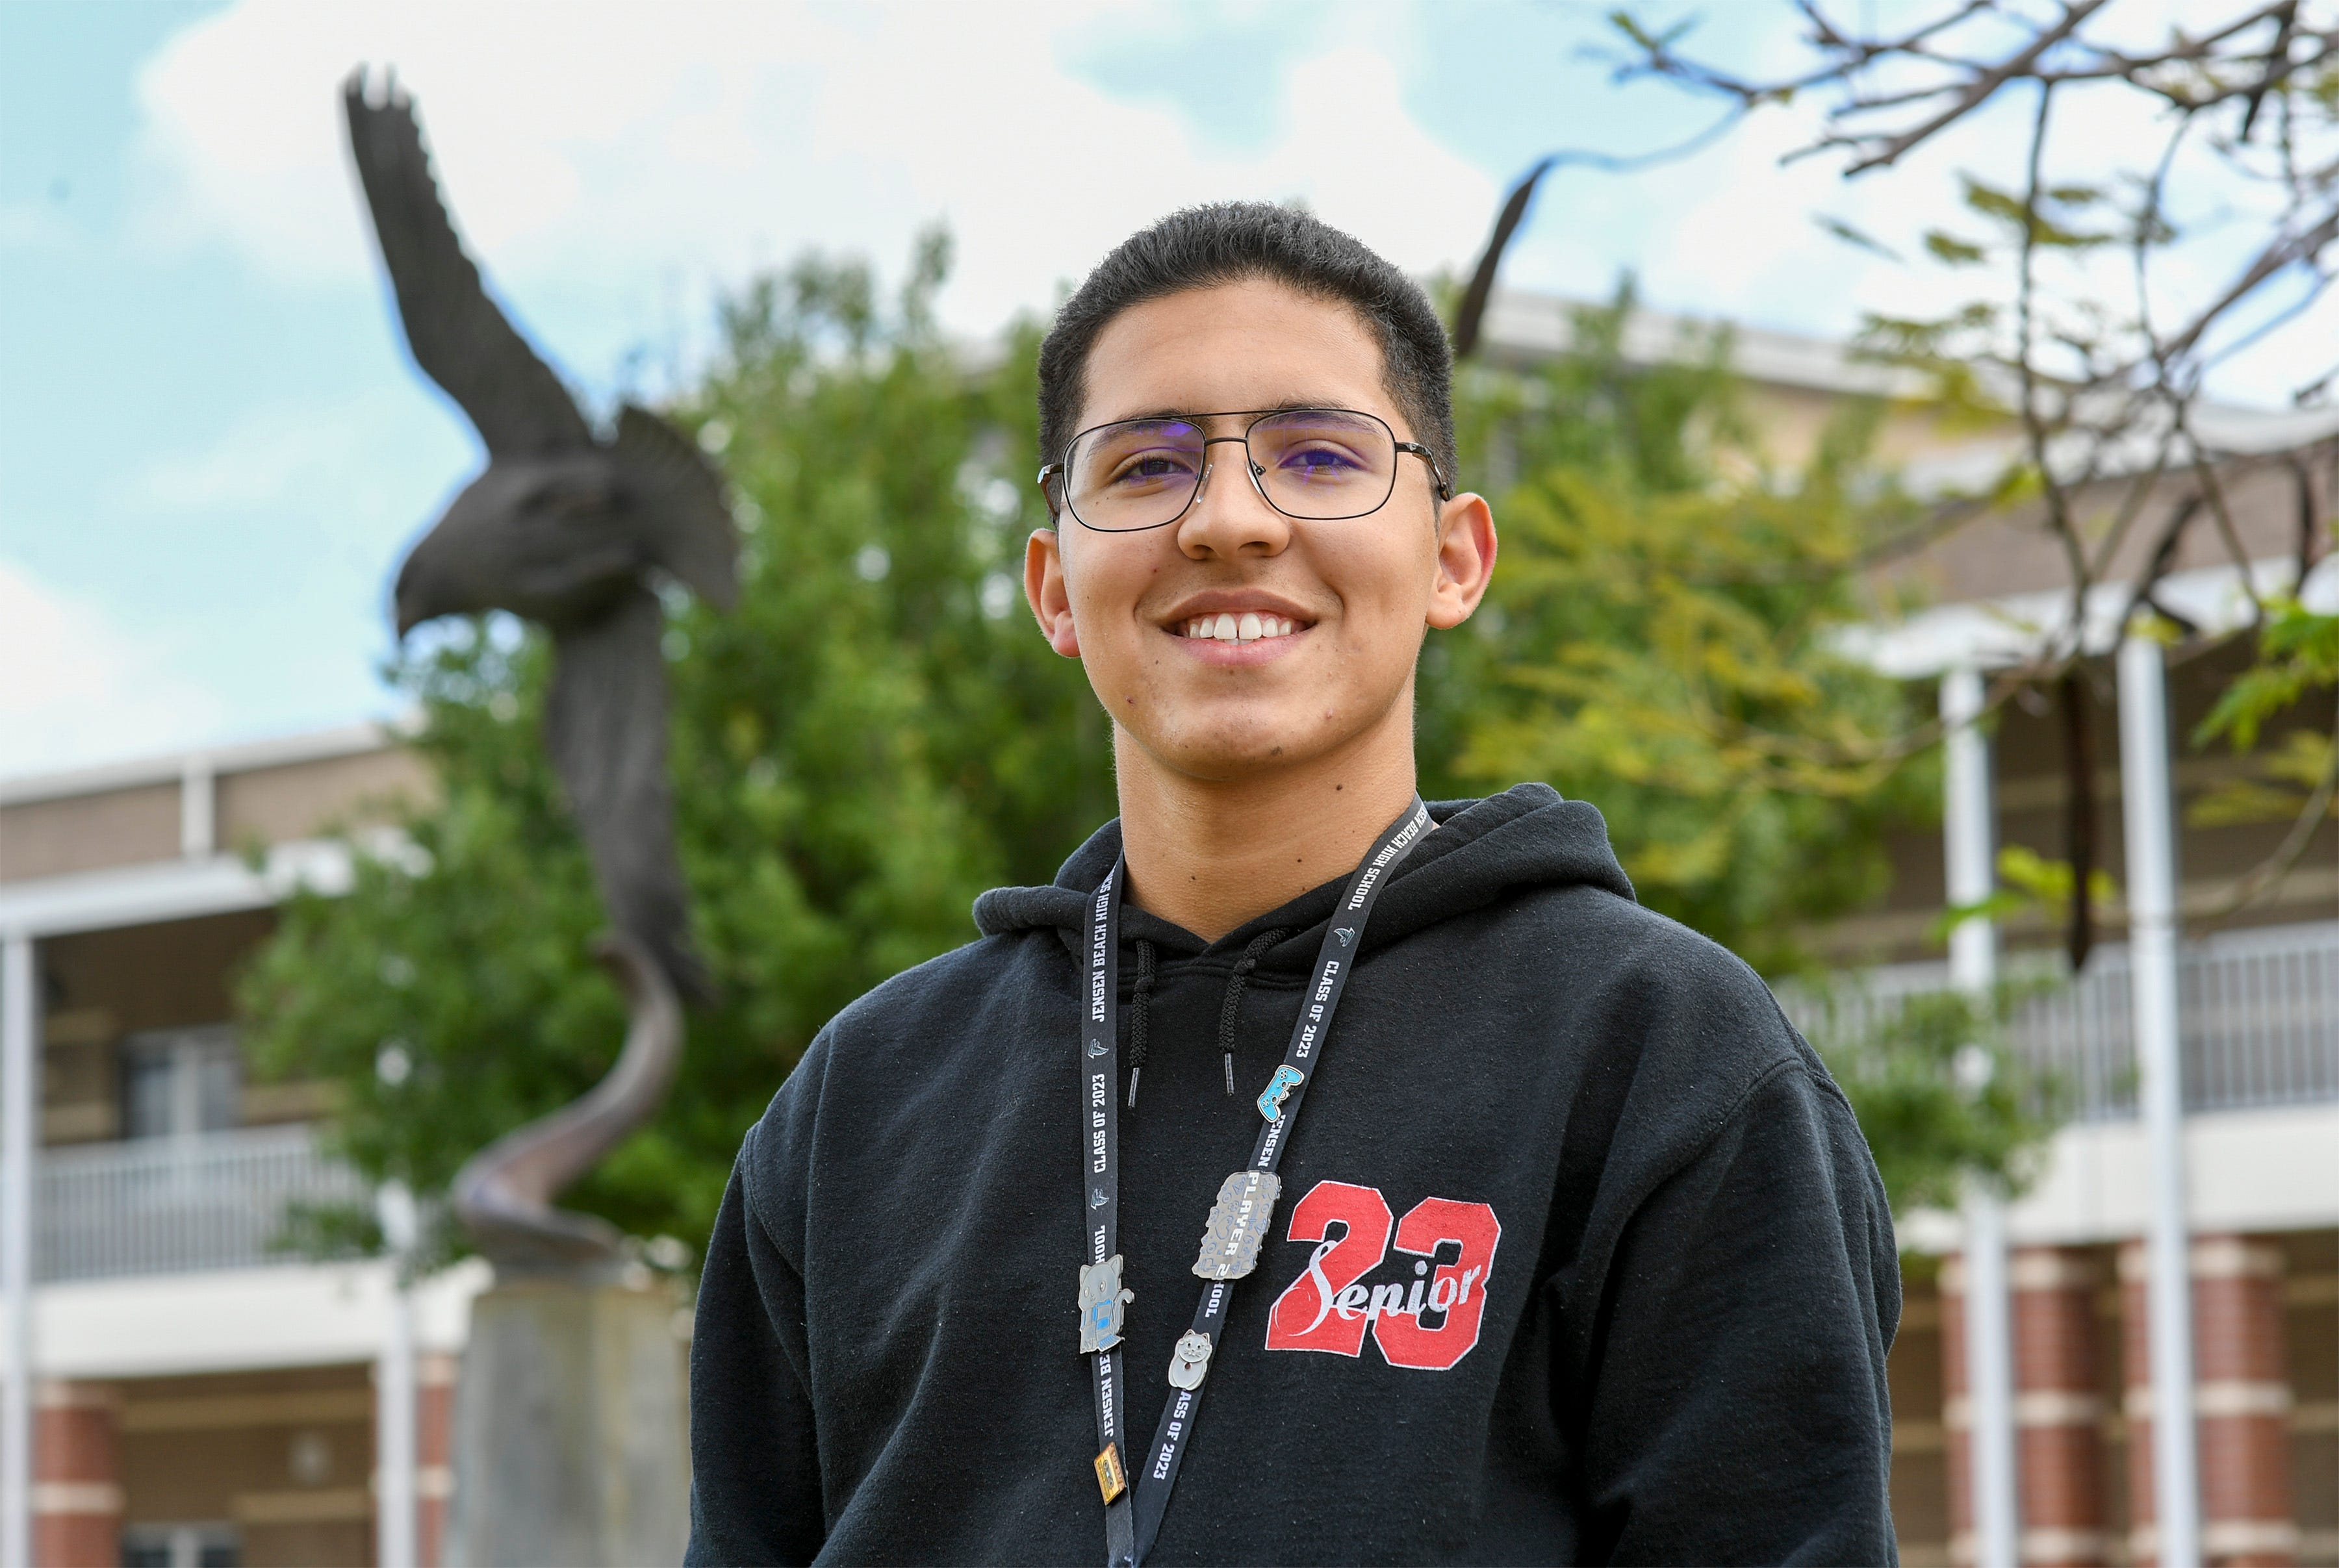 "I wasn't used to what was going on because I moved in the middle of the year, of freshman year, so it was confusing because it was a lot of technology and stuff I never did before," Juan Torres said. "I came here completely blank (from Venezuela), so I tried the best I could...tried to get through and get the best grades I could with my classes. But It was difficult, I really tried to get myself going because there was a point I didn't know what I'm doing."